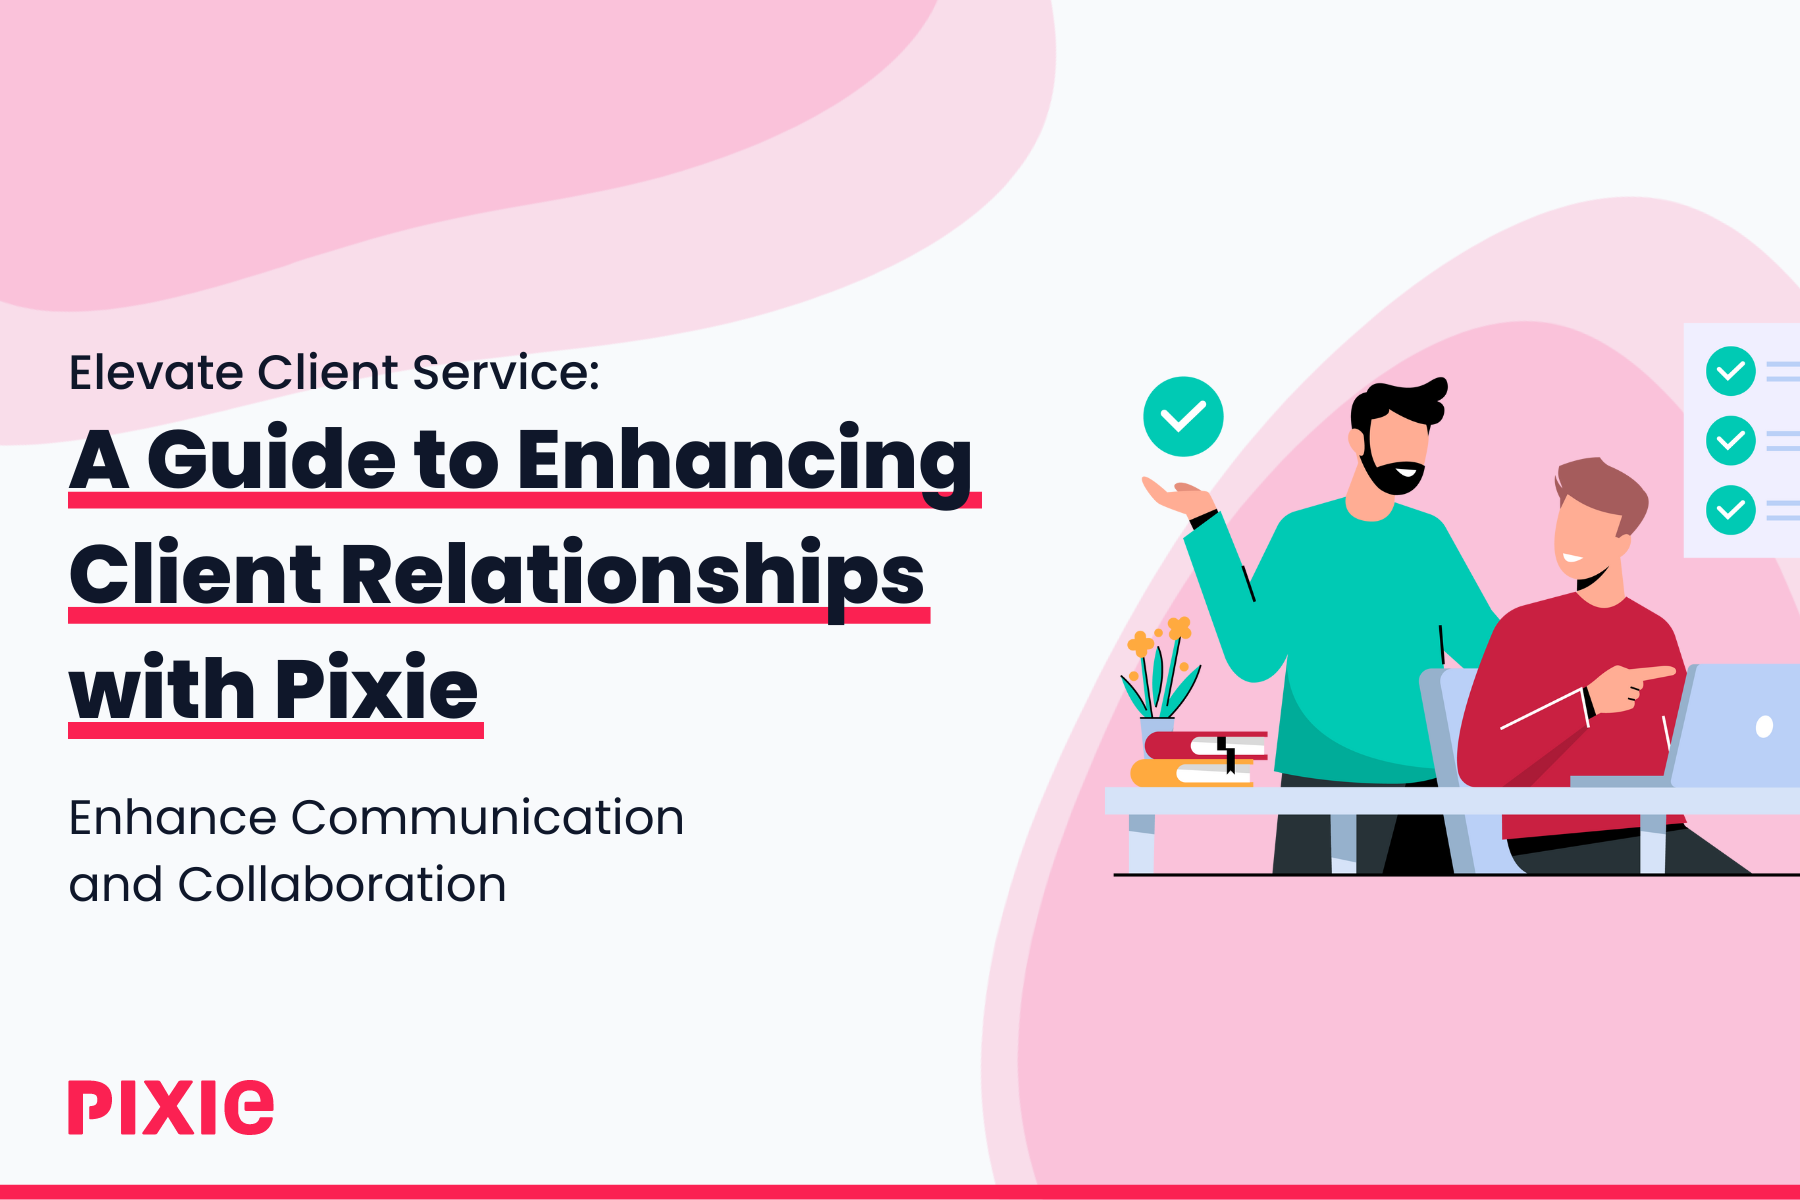 Elevate Client Service: A Guide to Enhancing Client Relationships with Pixie